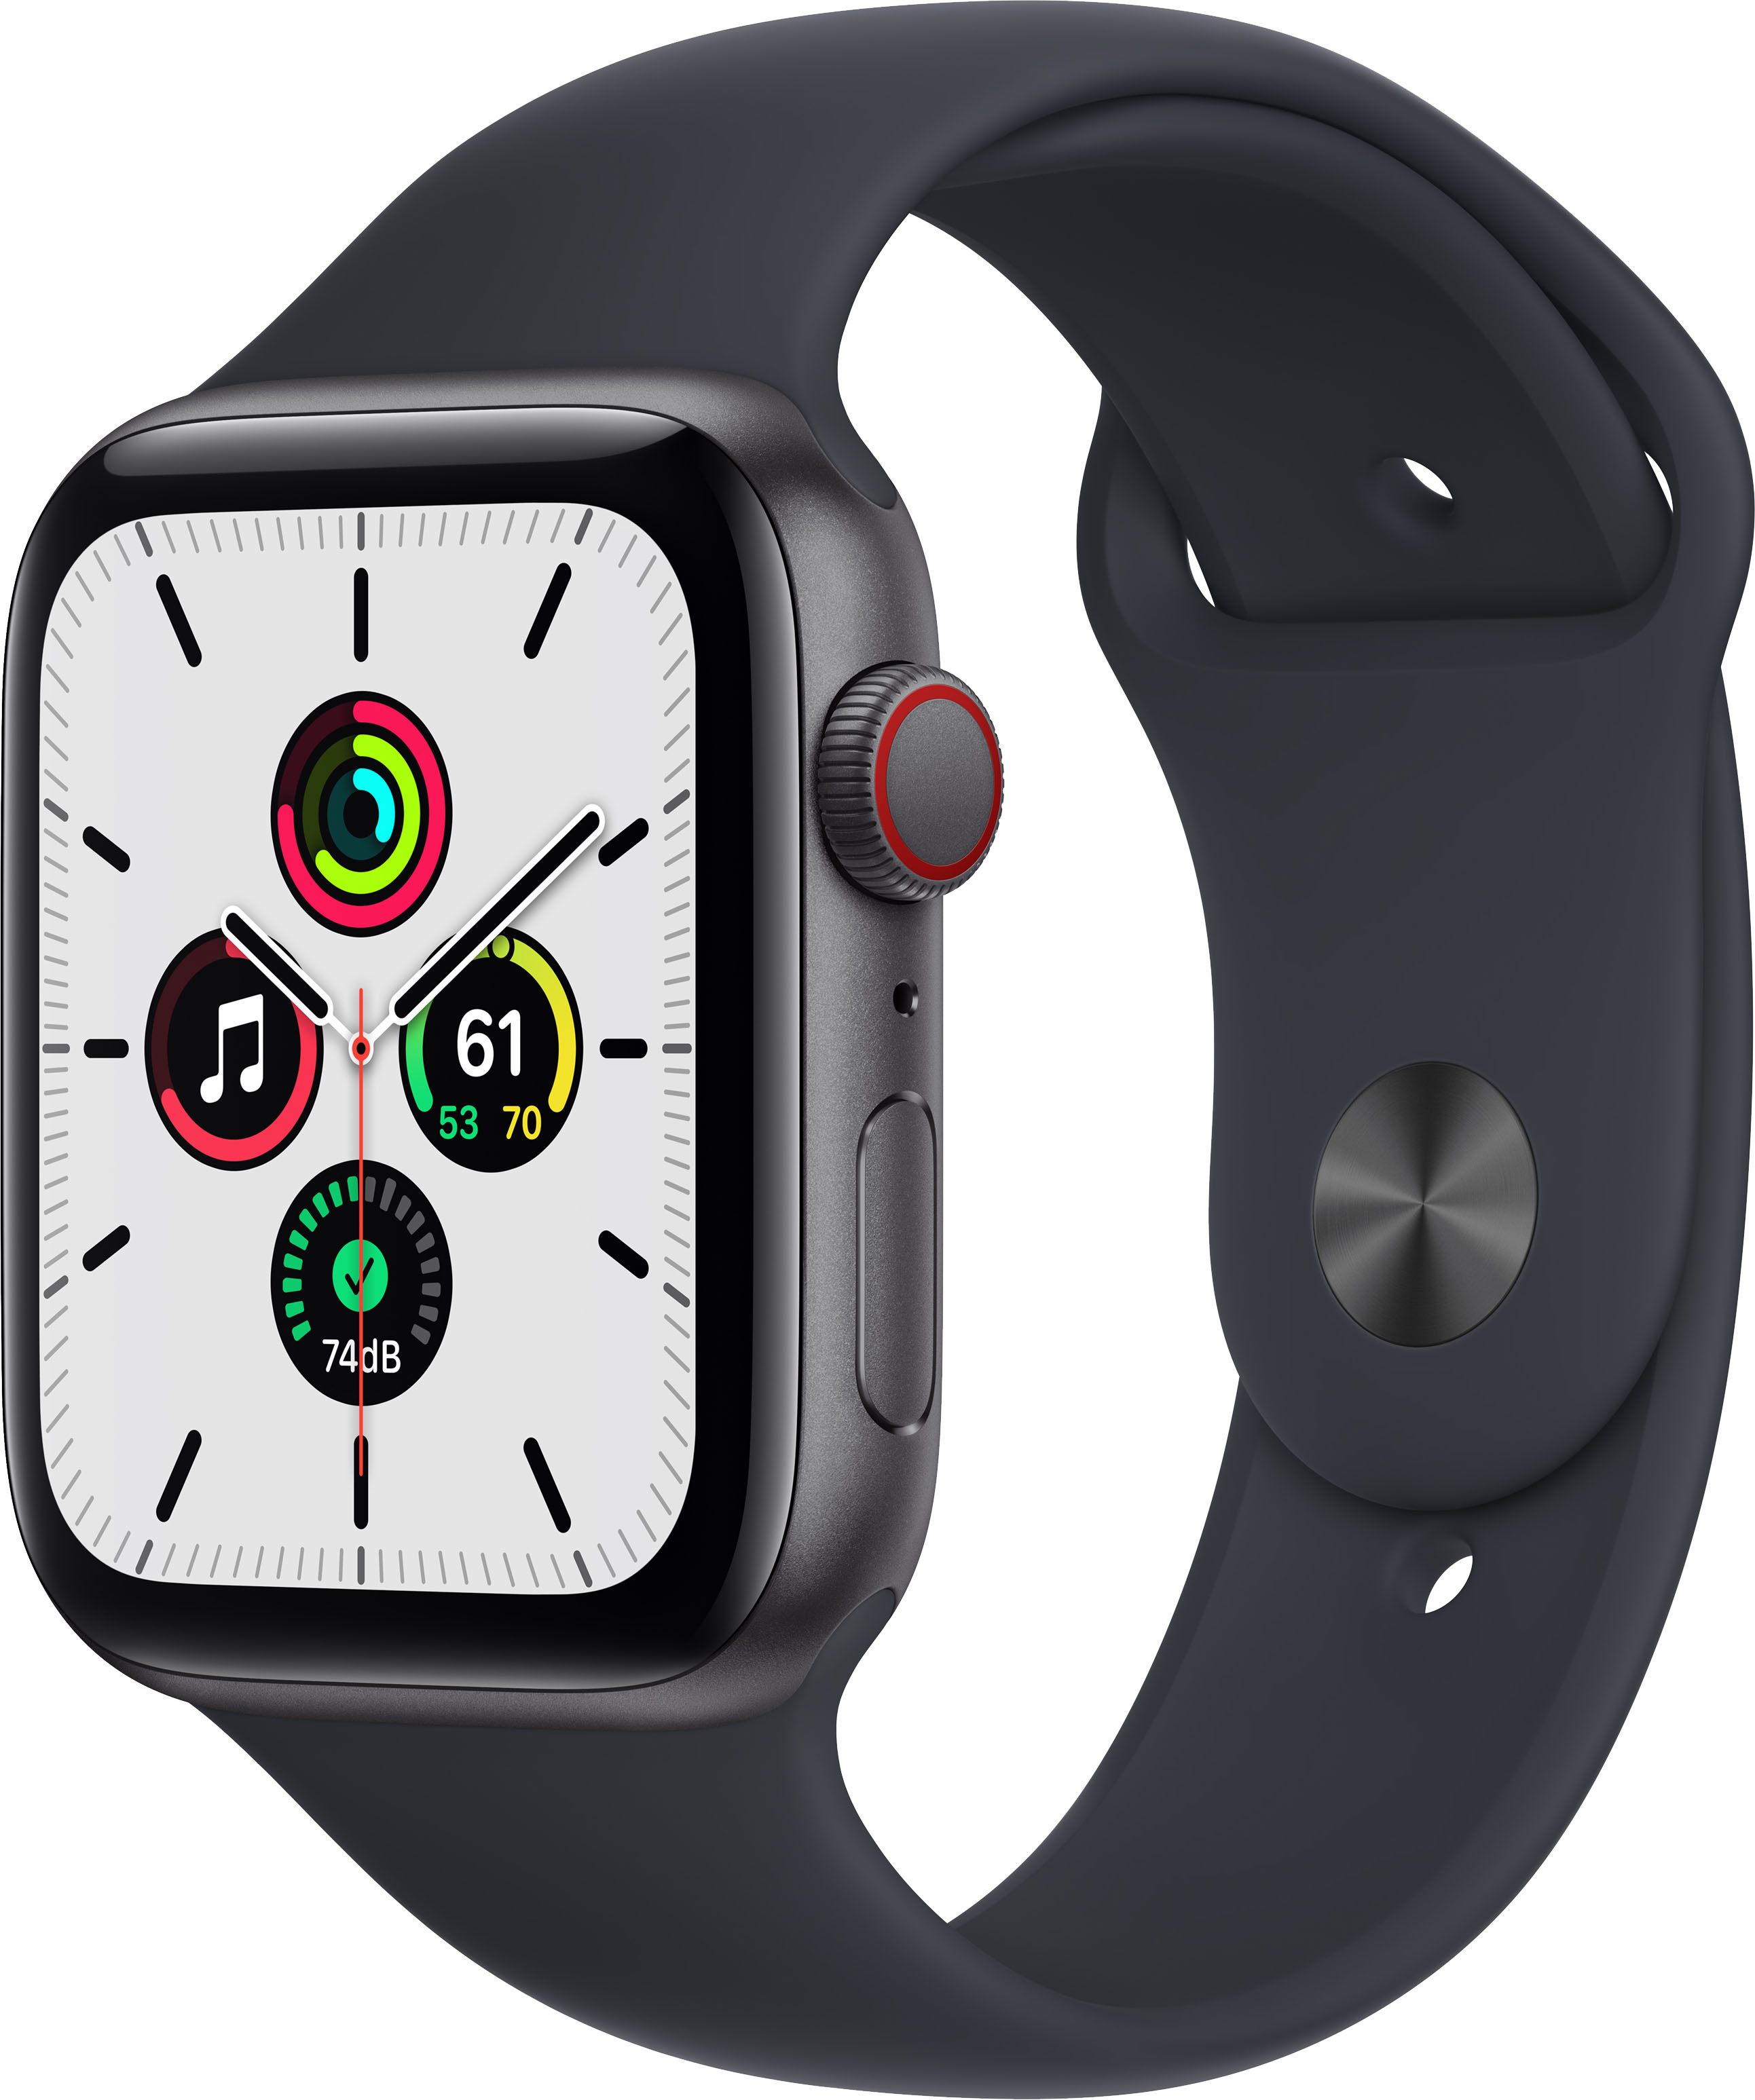 ᐅ refurbed™ Apple Watch SE Aluminum 44 mm (2020) from €270 Now with a